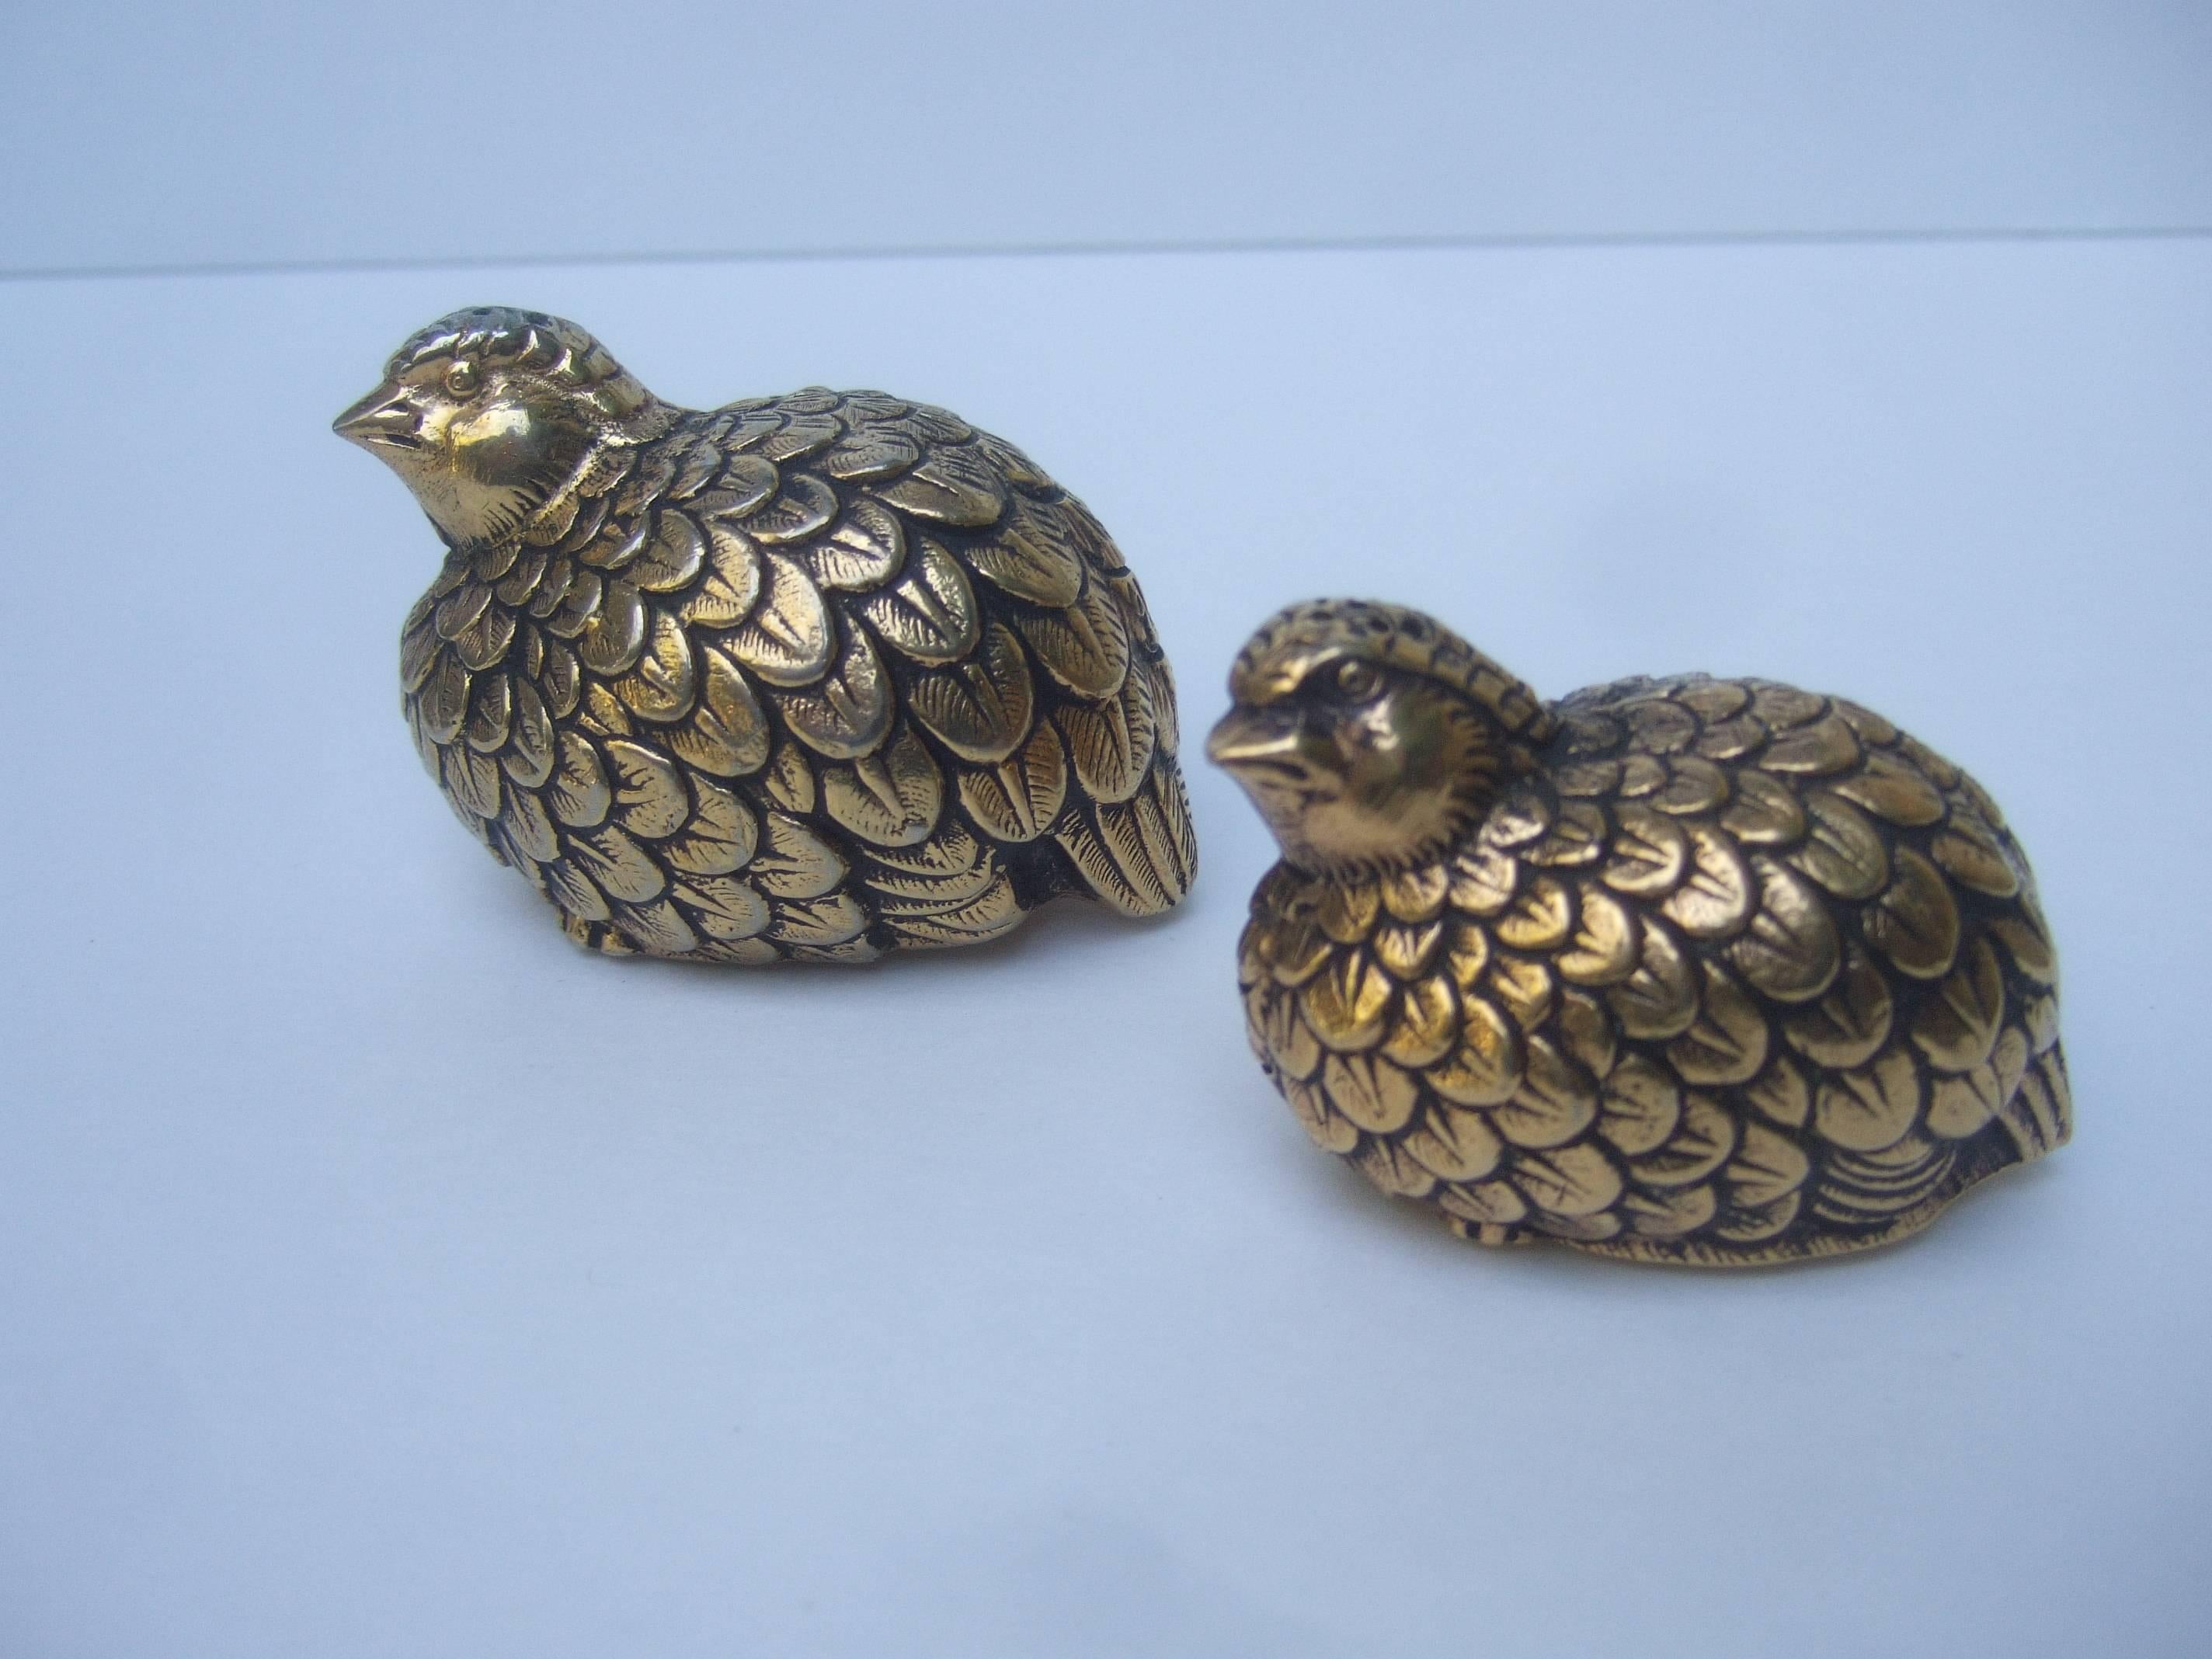 Gucci Italy Elegant pair of quail bird salt and pepper shakers
The stylized gilt metal birds are designed with textured detail 
that emulates feathers

The pair of quails are perched together in graduated sizes
The unique pair of Gucci quails